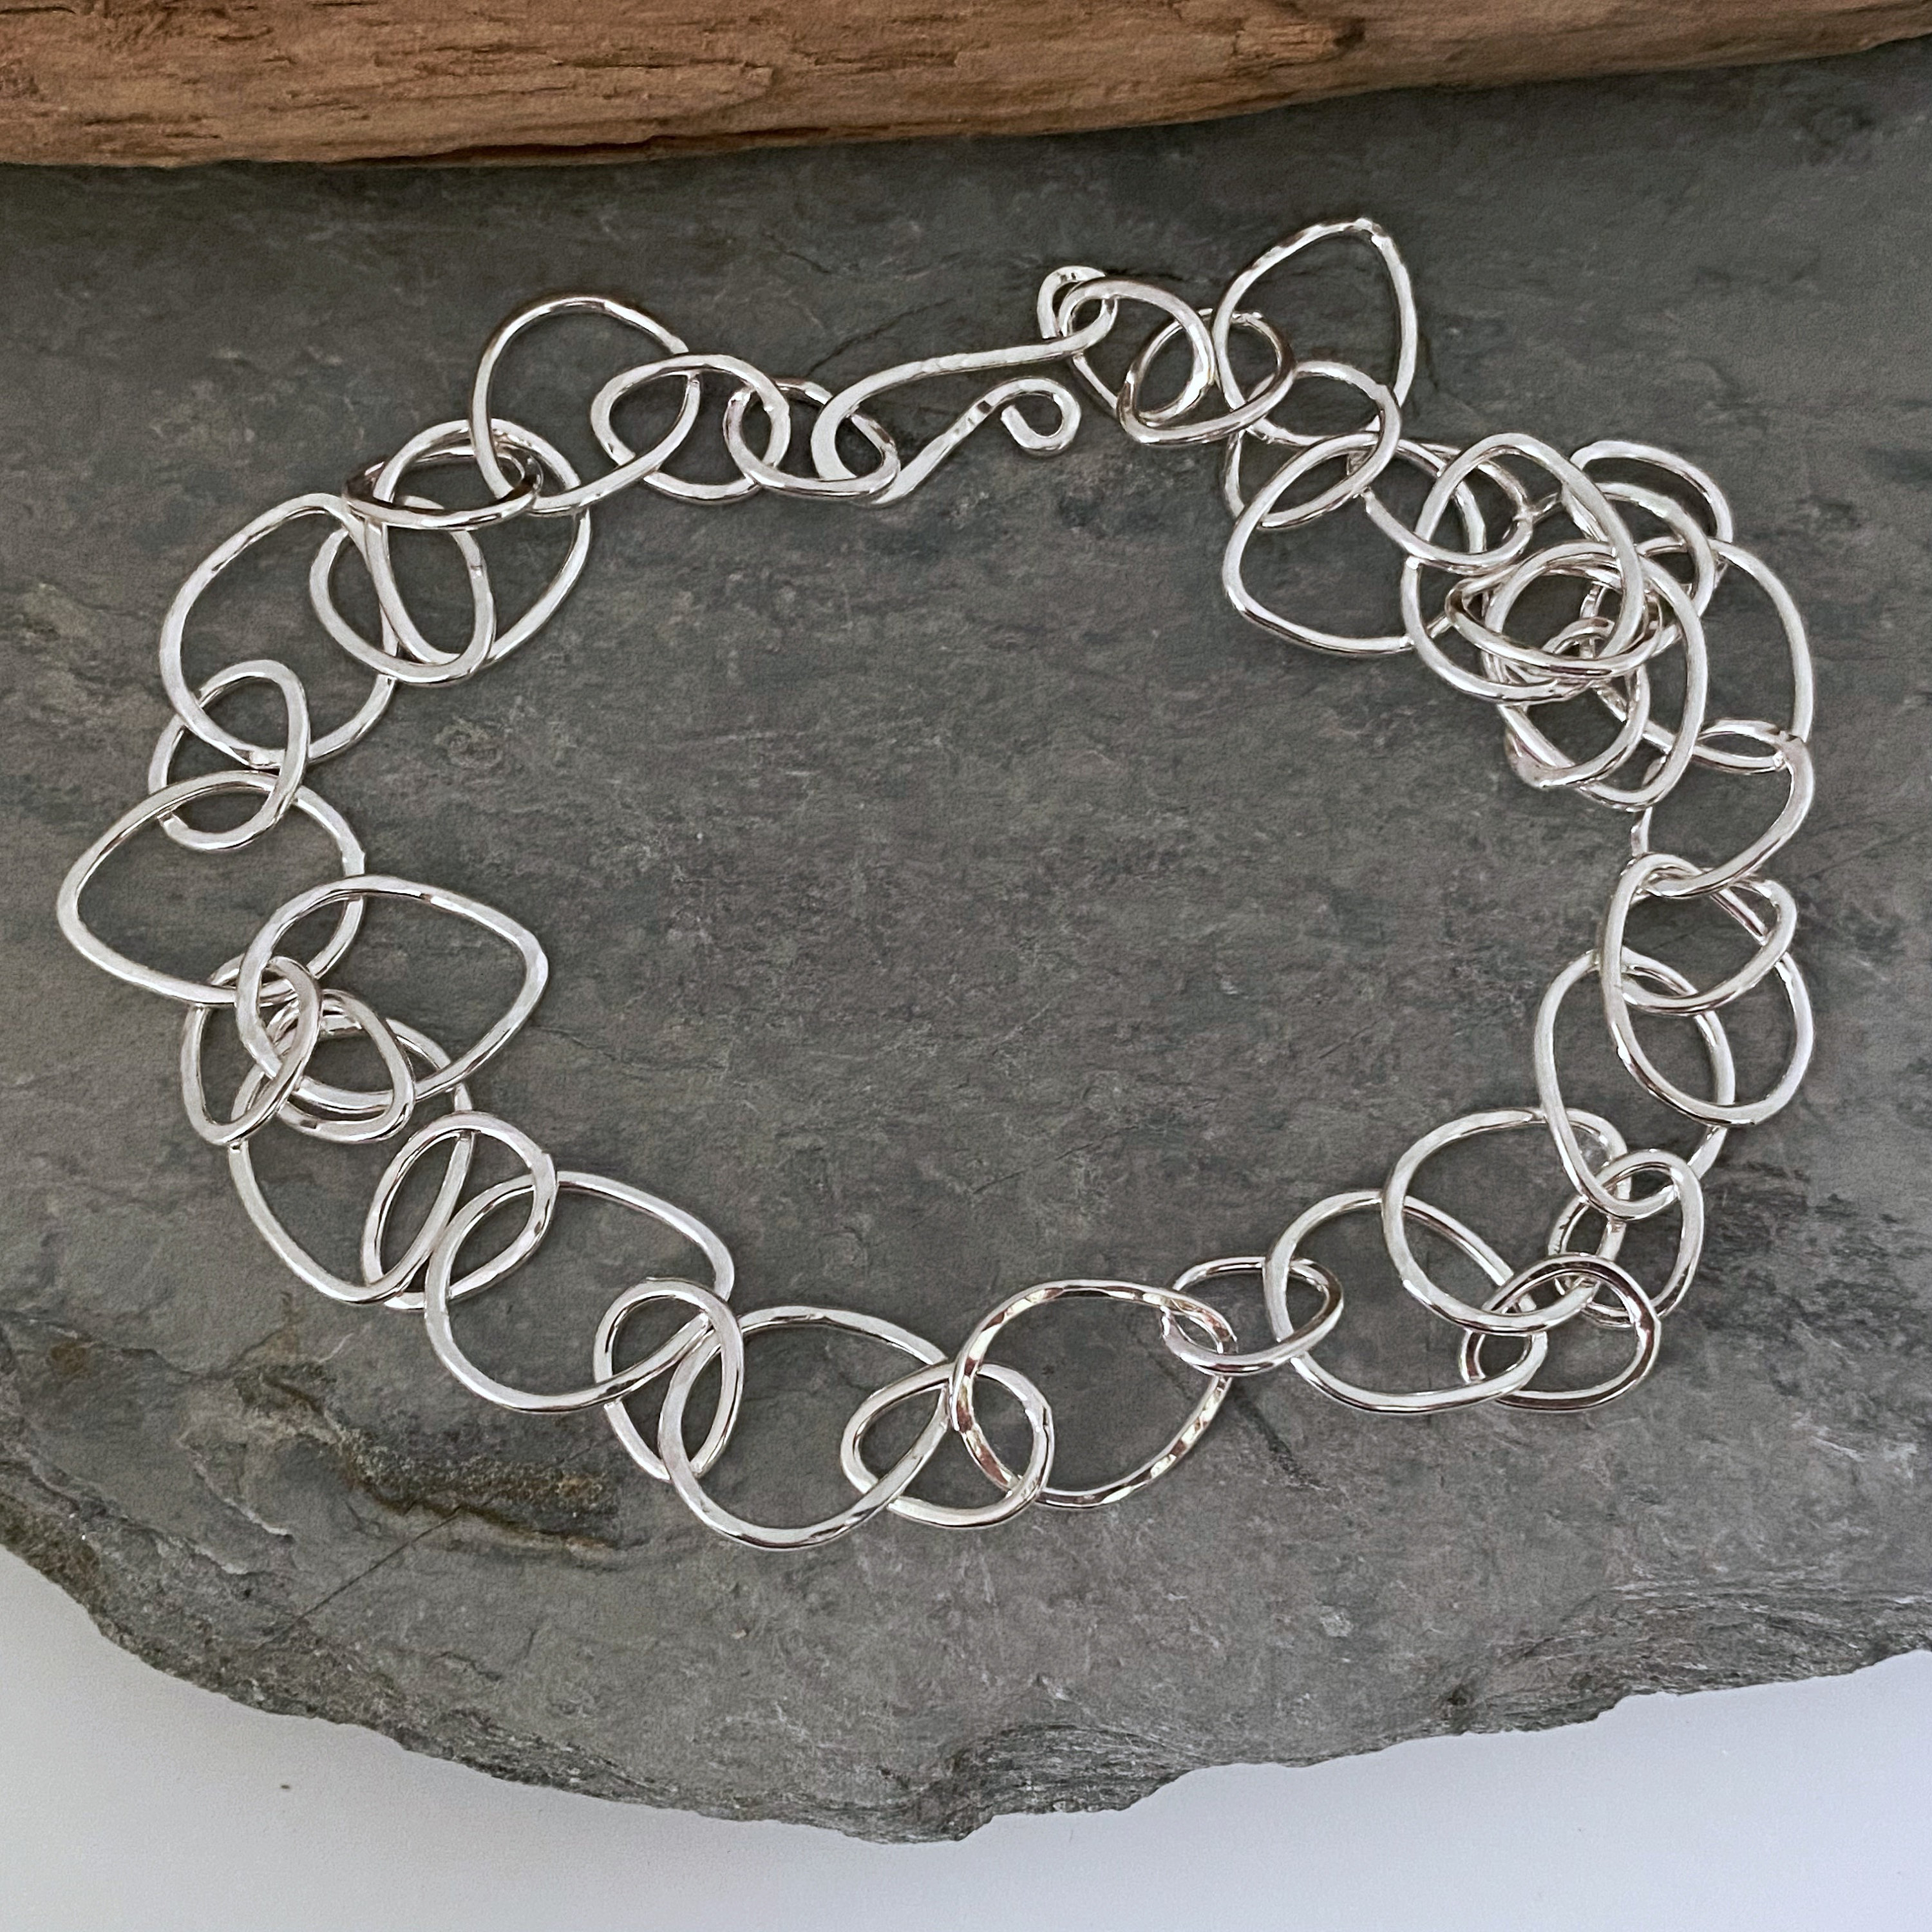 Chunky Silver Chain Necklace Made From Raindrop Shaped Links, Heavy Necklace, Solid Handmade